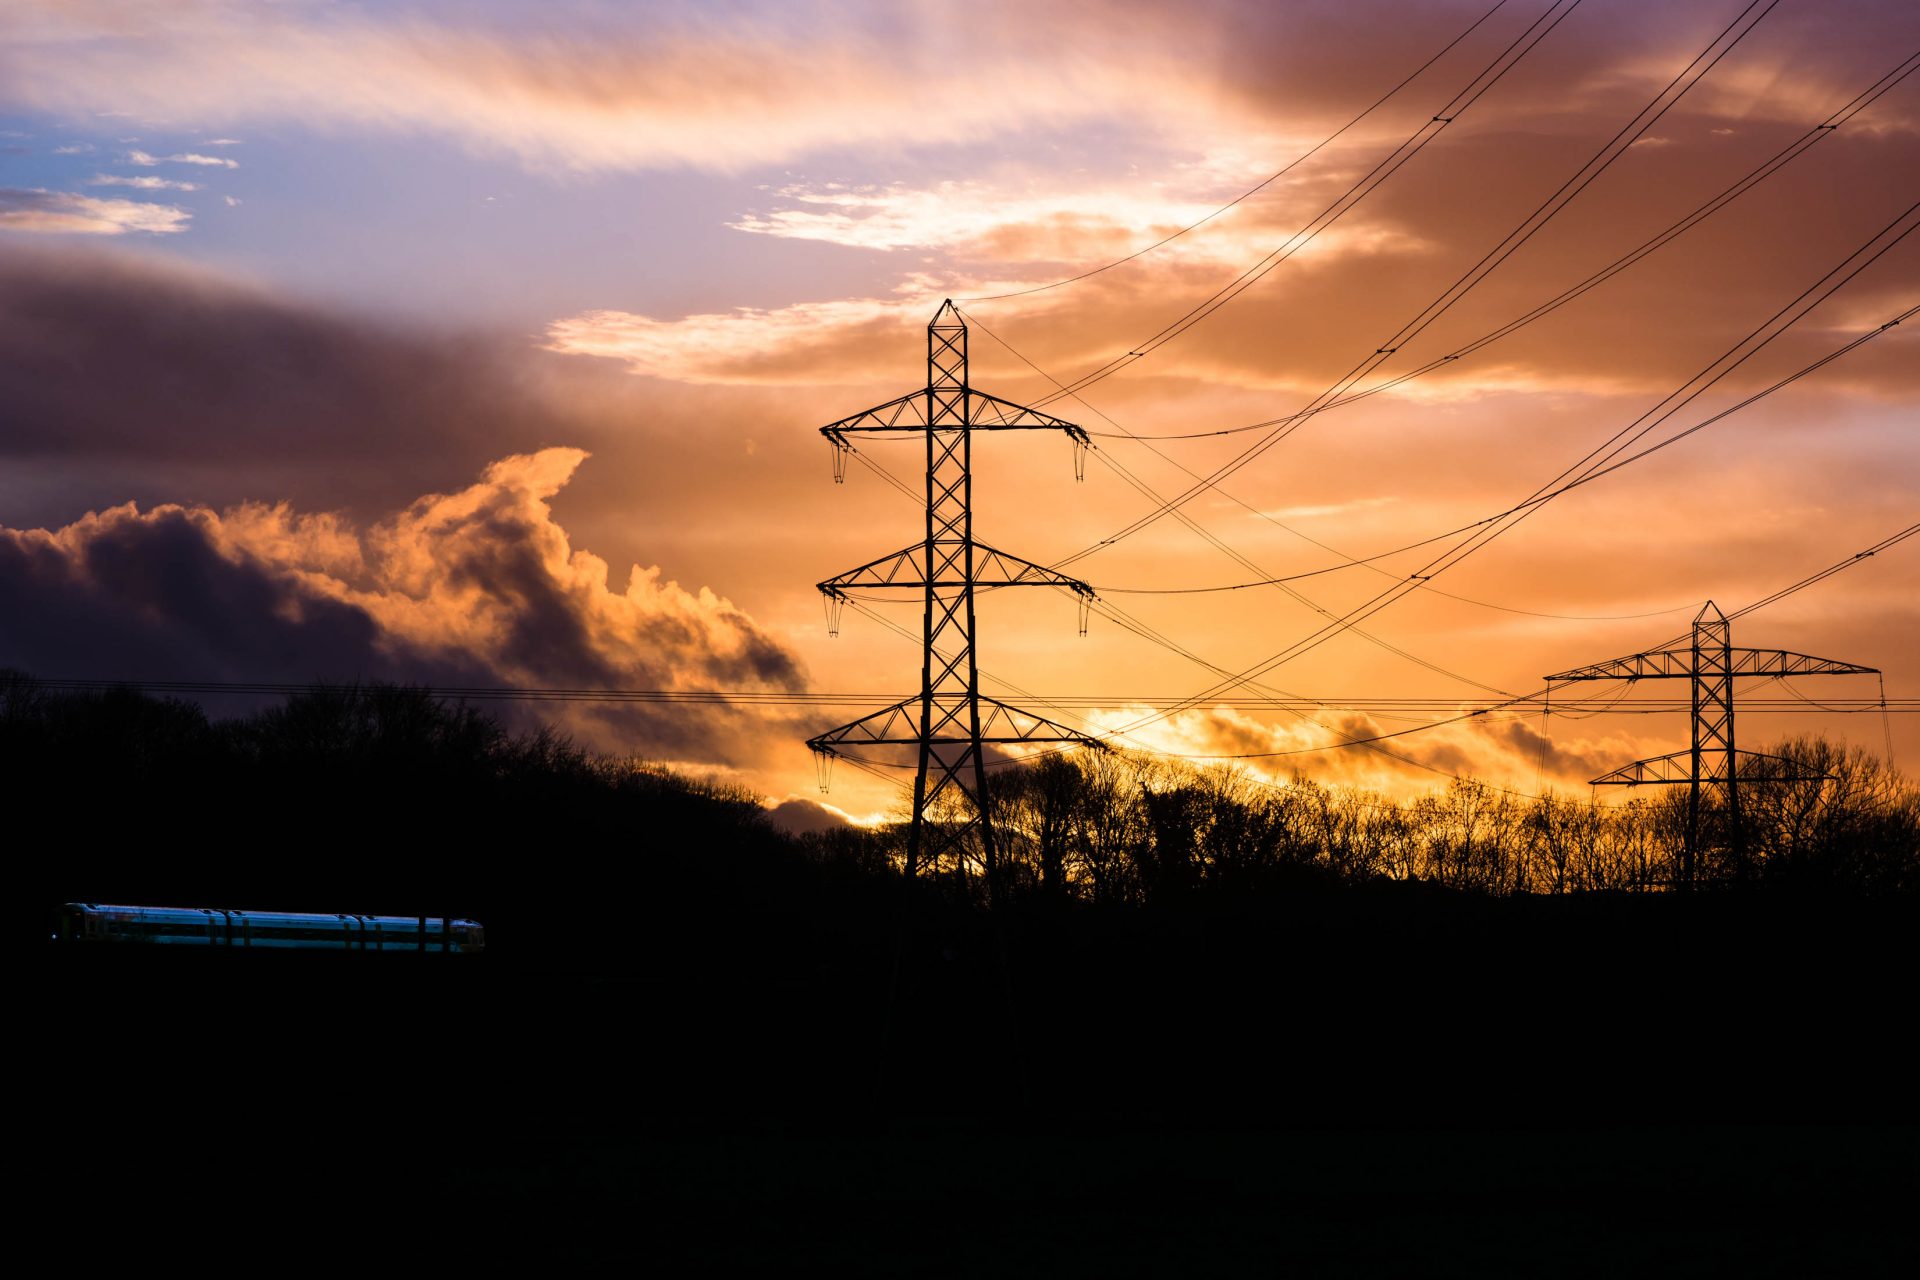 What: Industrial landscape with cables, pylons and train at sunset Where: Somerset, UK When: January 2016